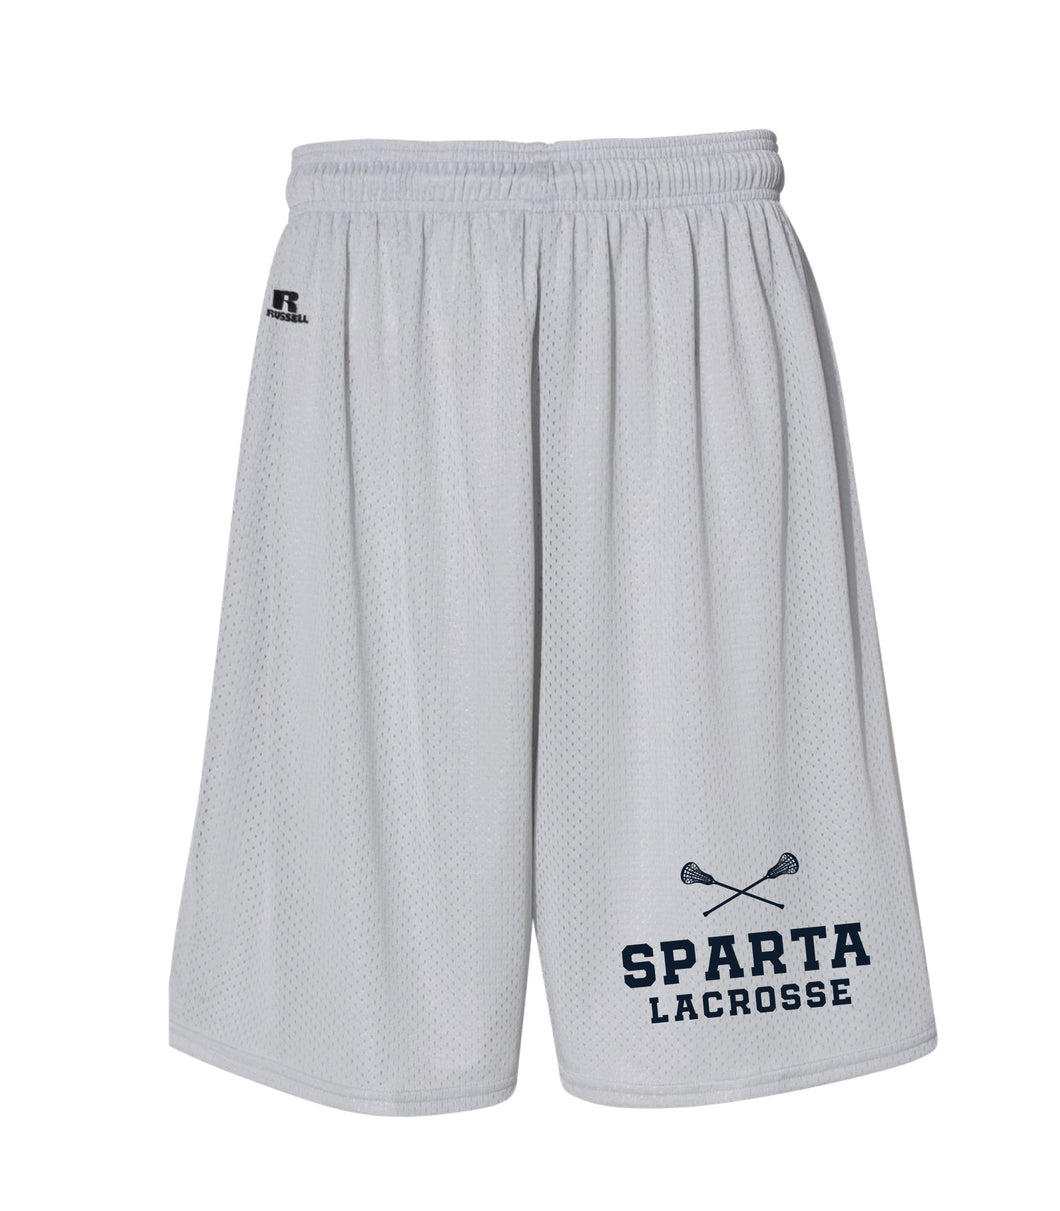 Sparta Lacrosse Russell Athletic Tech Shorts - Gray - 5KounT